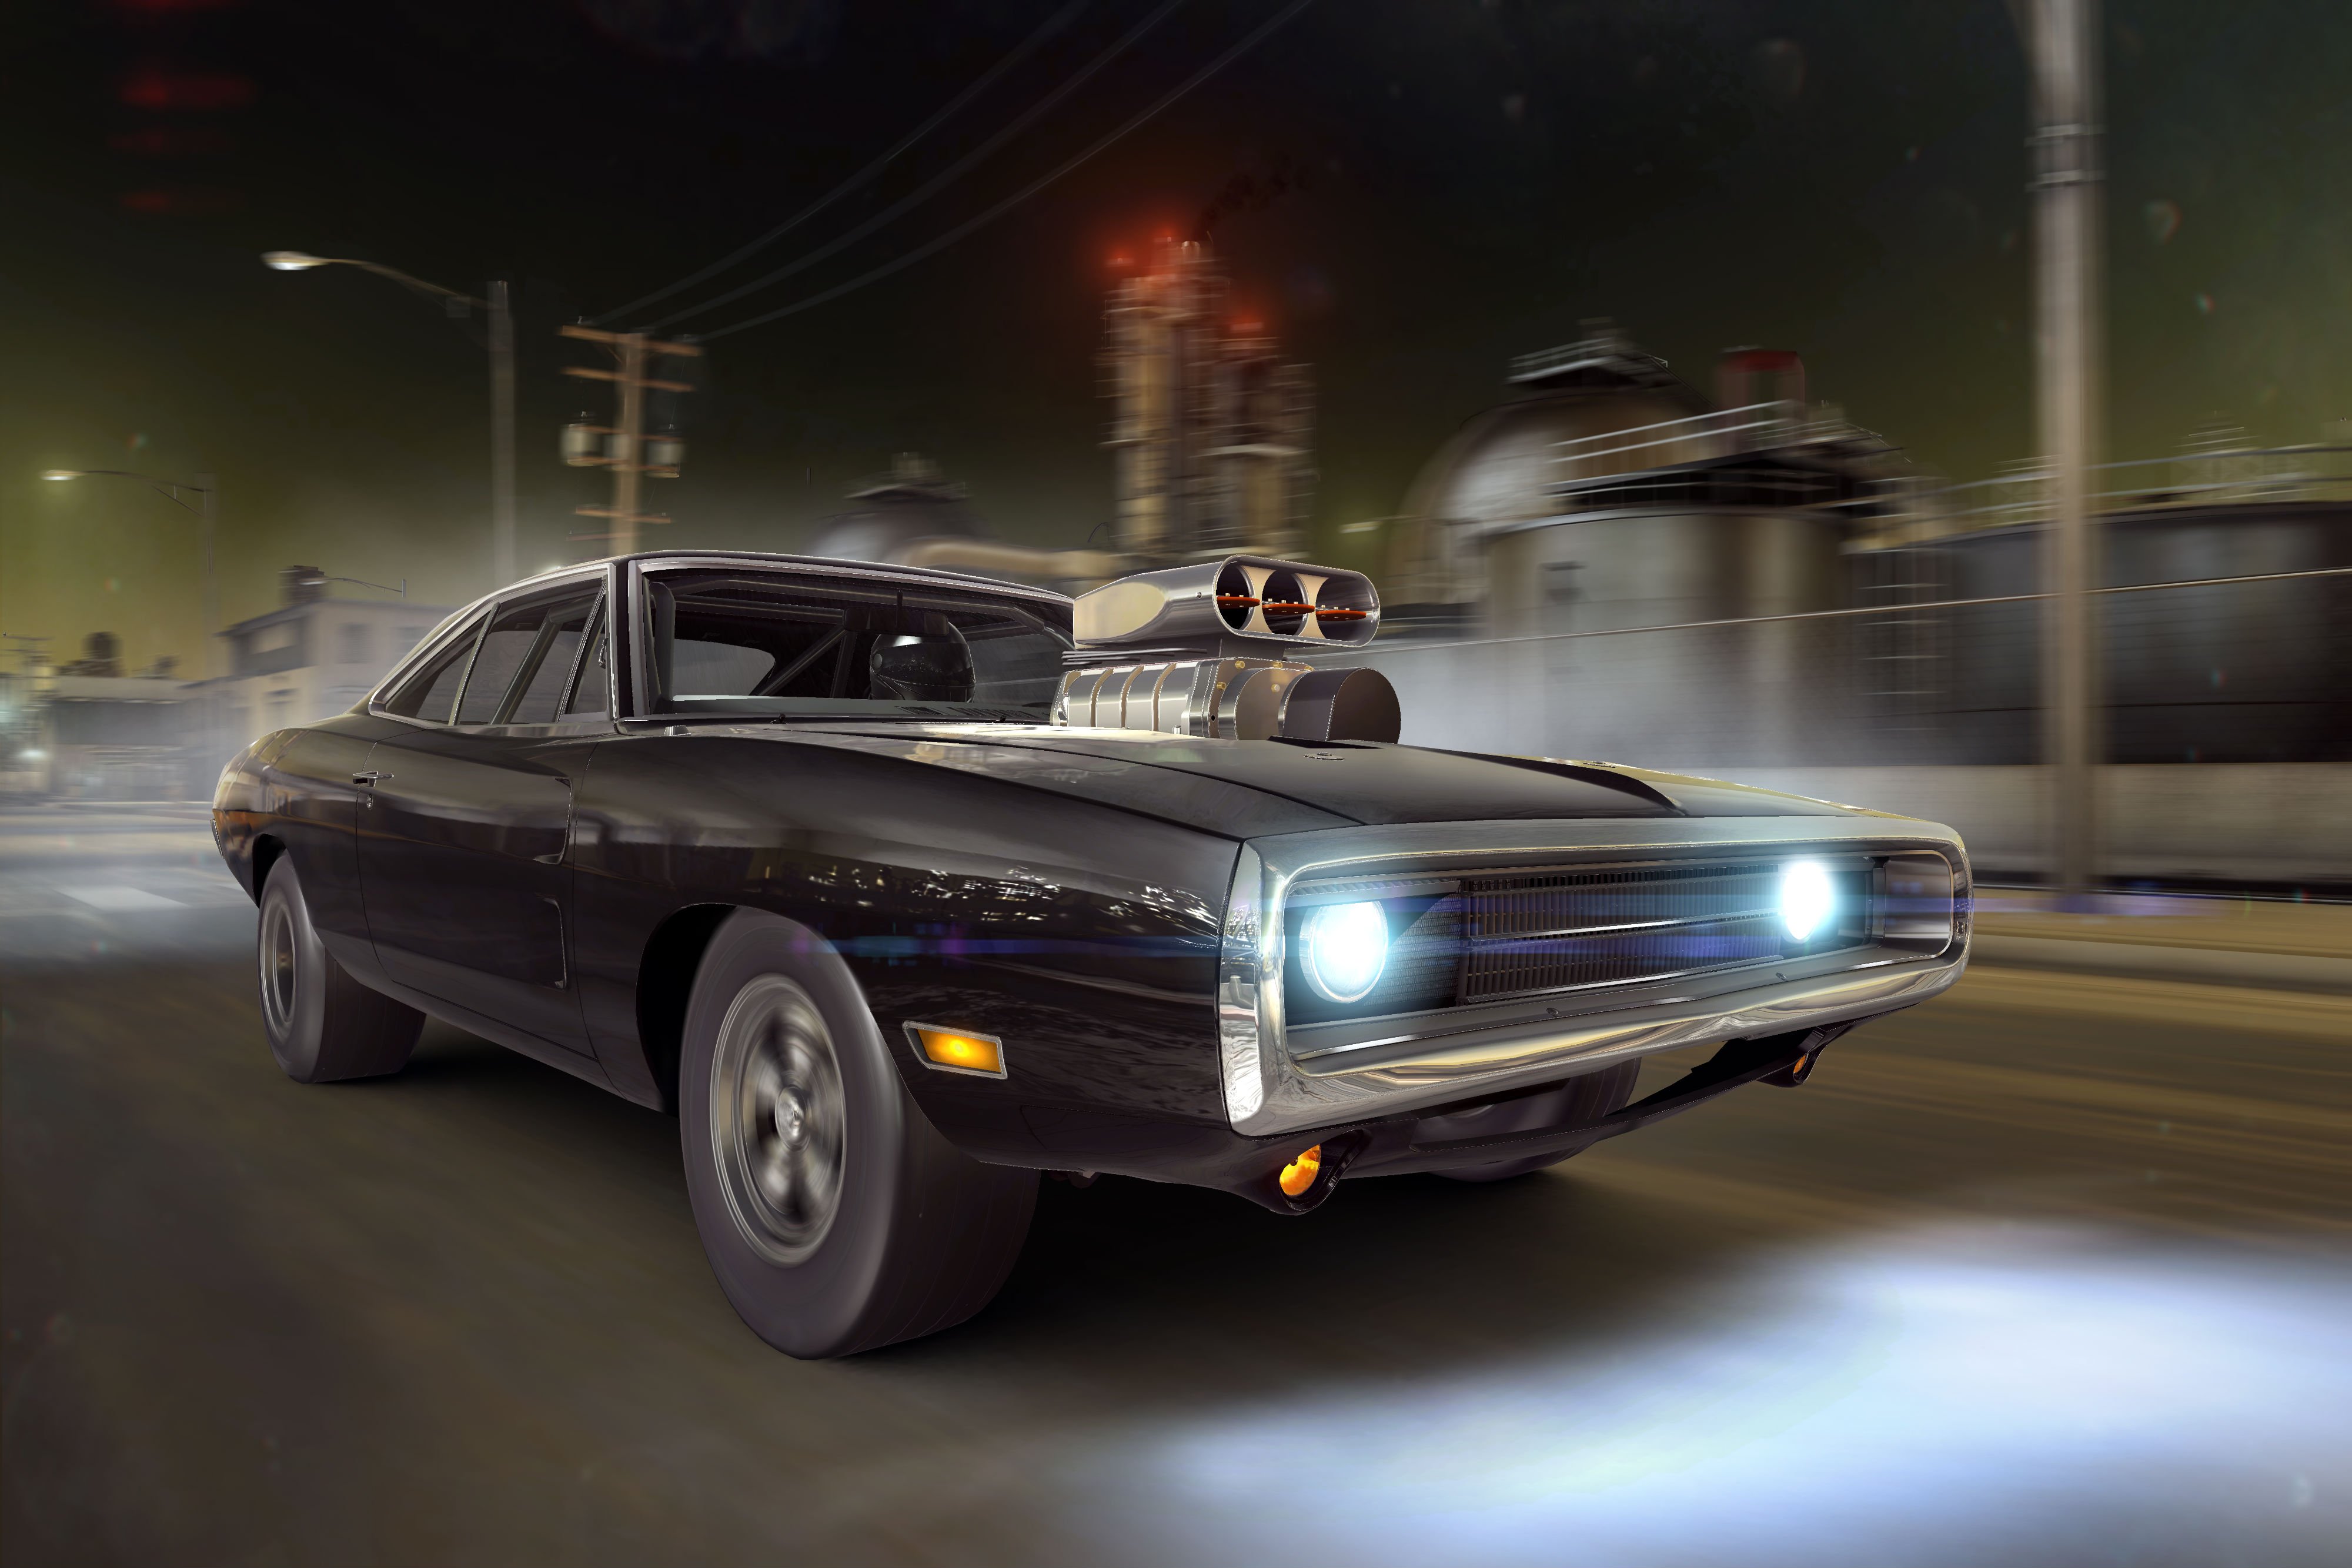 ‘Fast & Furious’ About to Make a … Well, Fast & Furious Return to ‘CSR Racing 2’